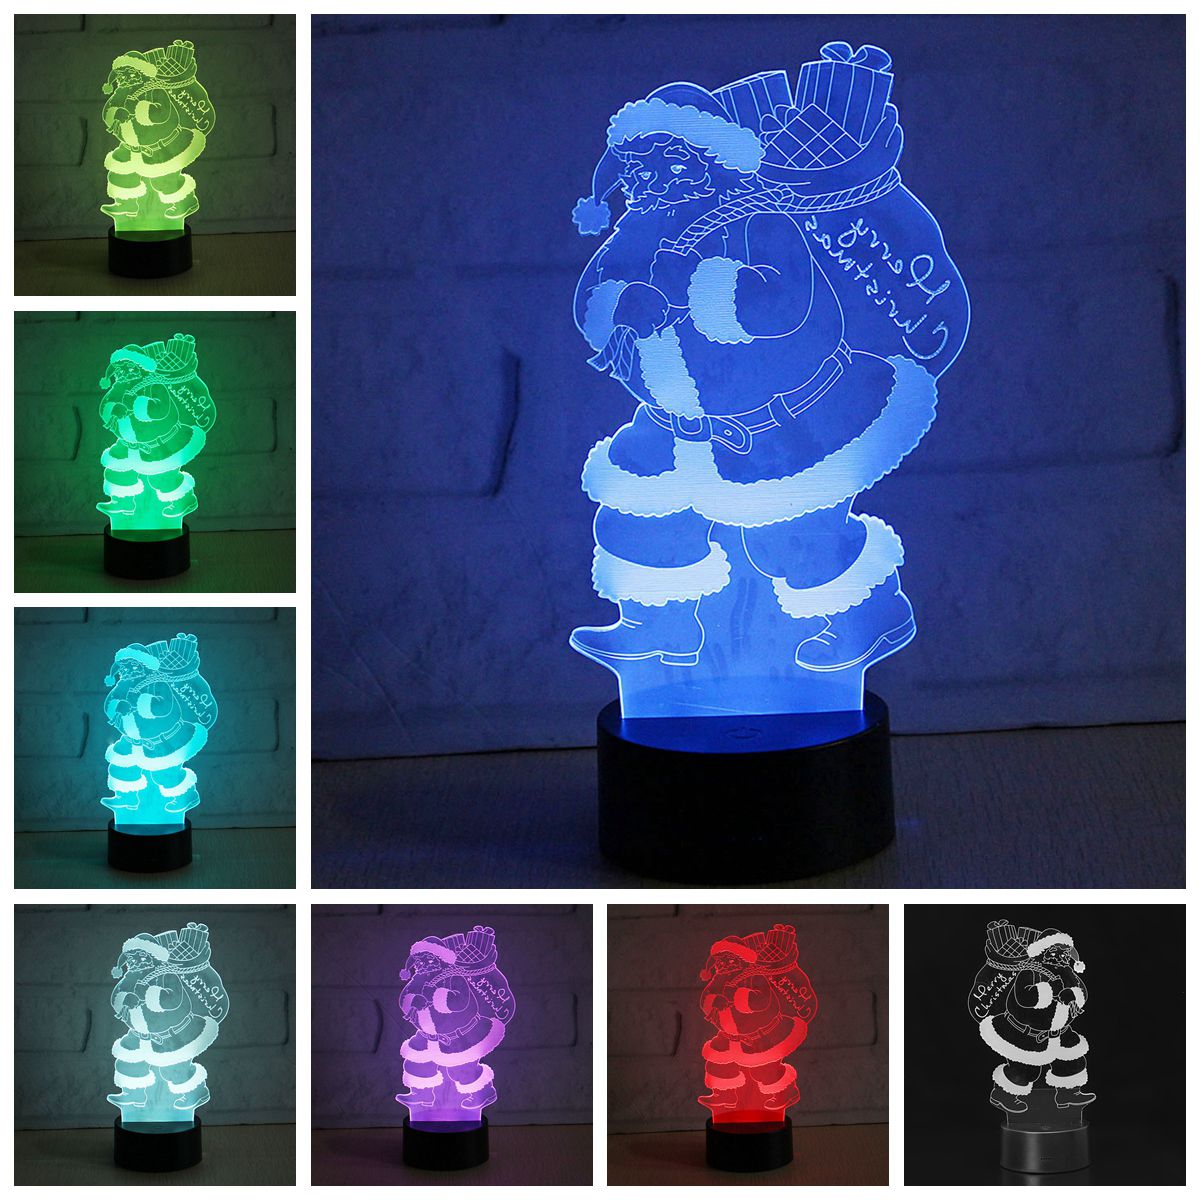 3D-LED-Colorful-Christmas-Santa-Claus-Touch-Control-Lamp-Decor-Gift-Night-Light-1370565-1